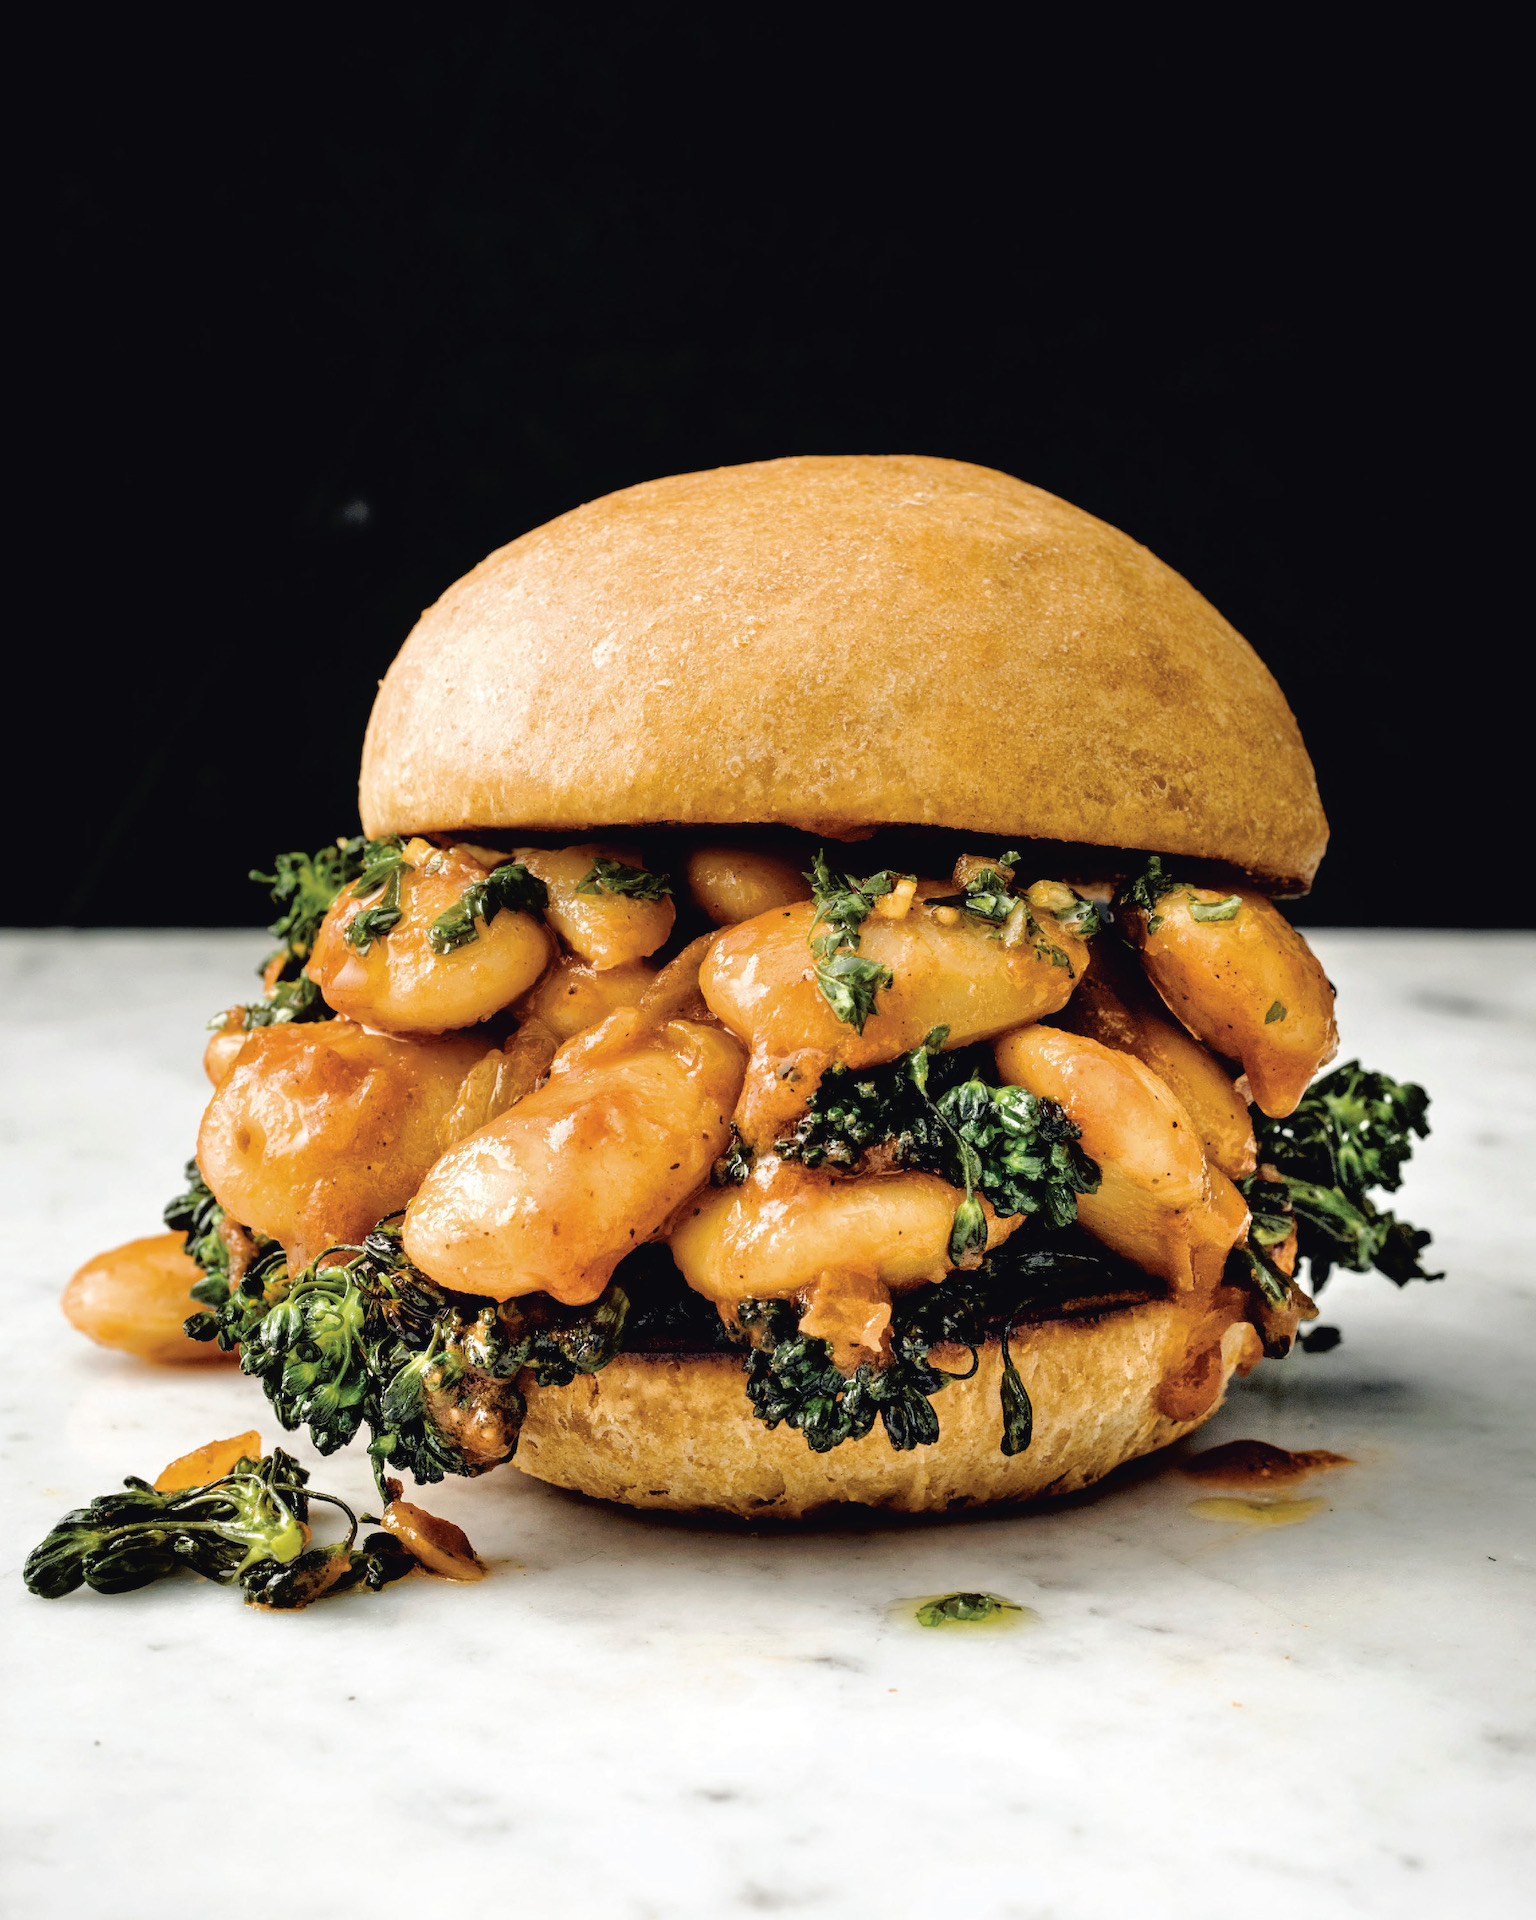 Chef Bryant Terry's big beans, buns and broccoli rabe rabe packs protein and texture between a teff and flour bun.